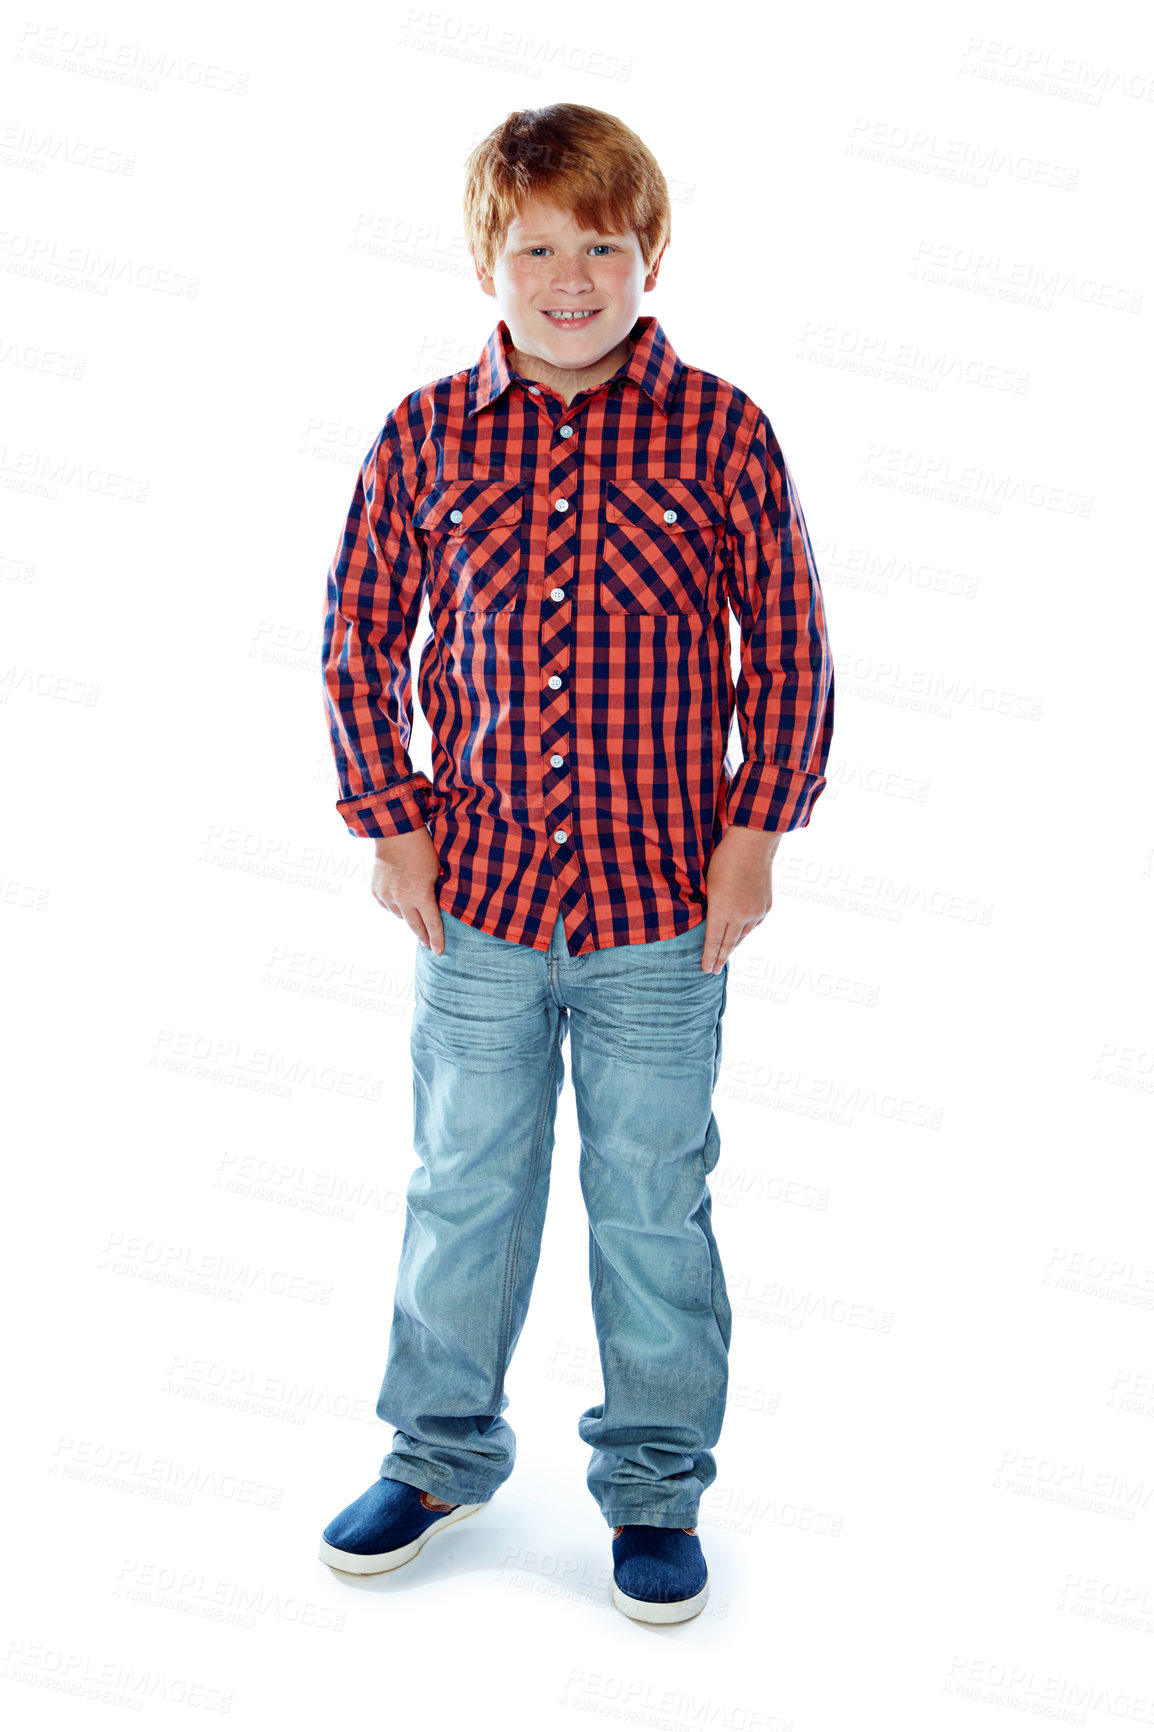 Buy stock photo Studio portrait of a young boy posing against a white background